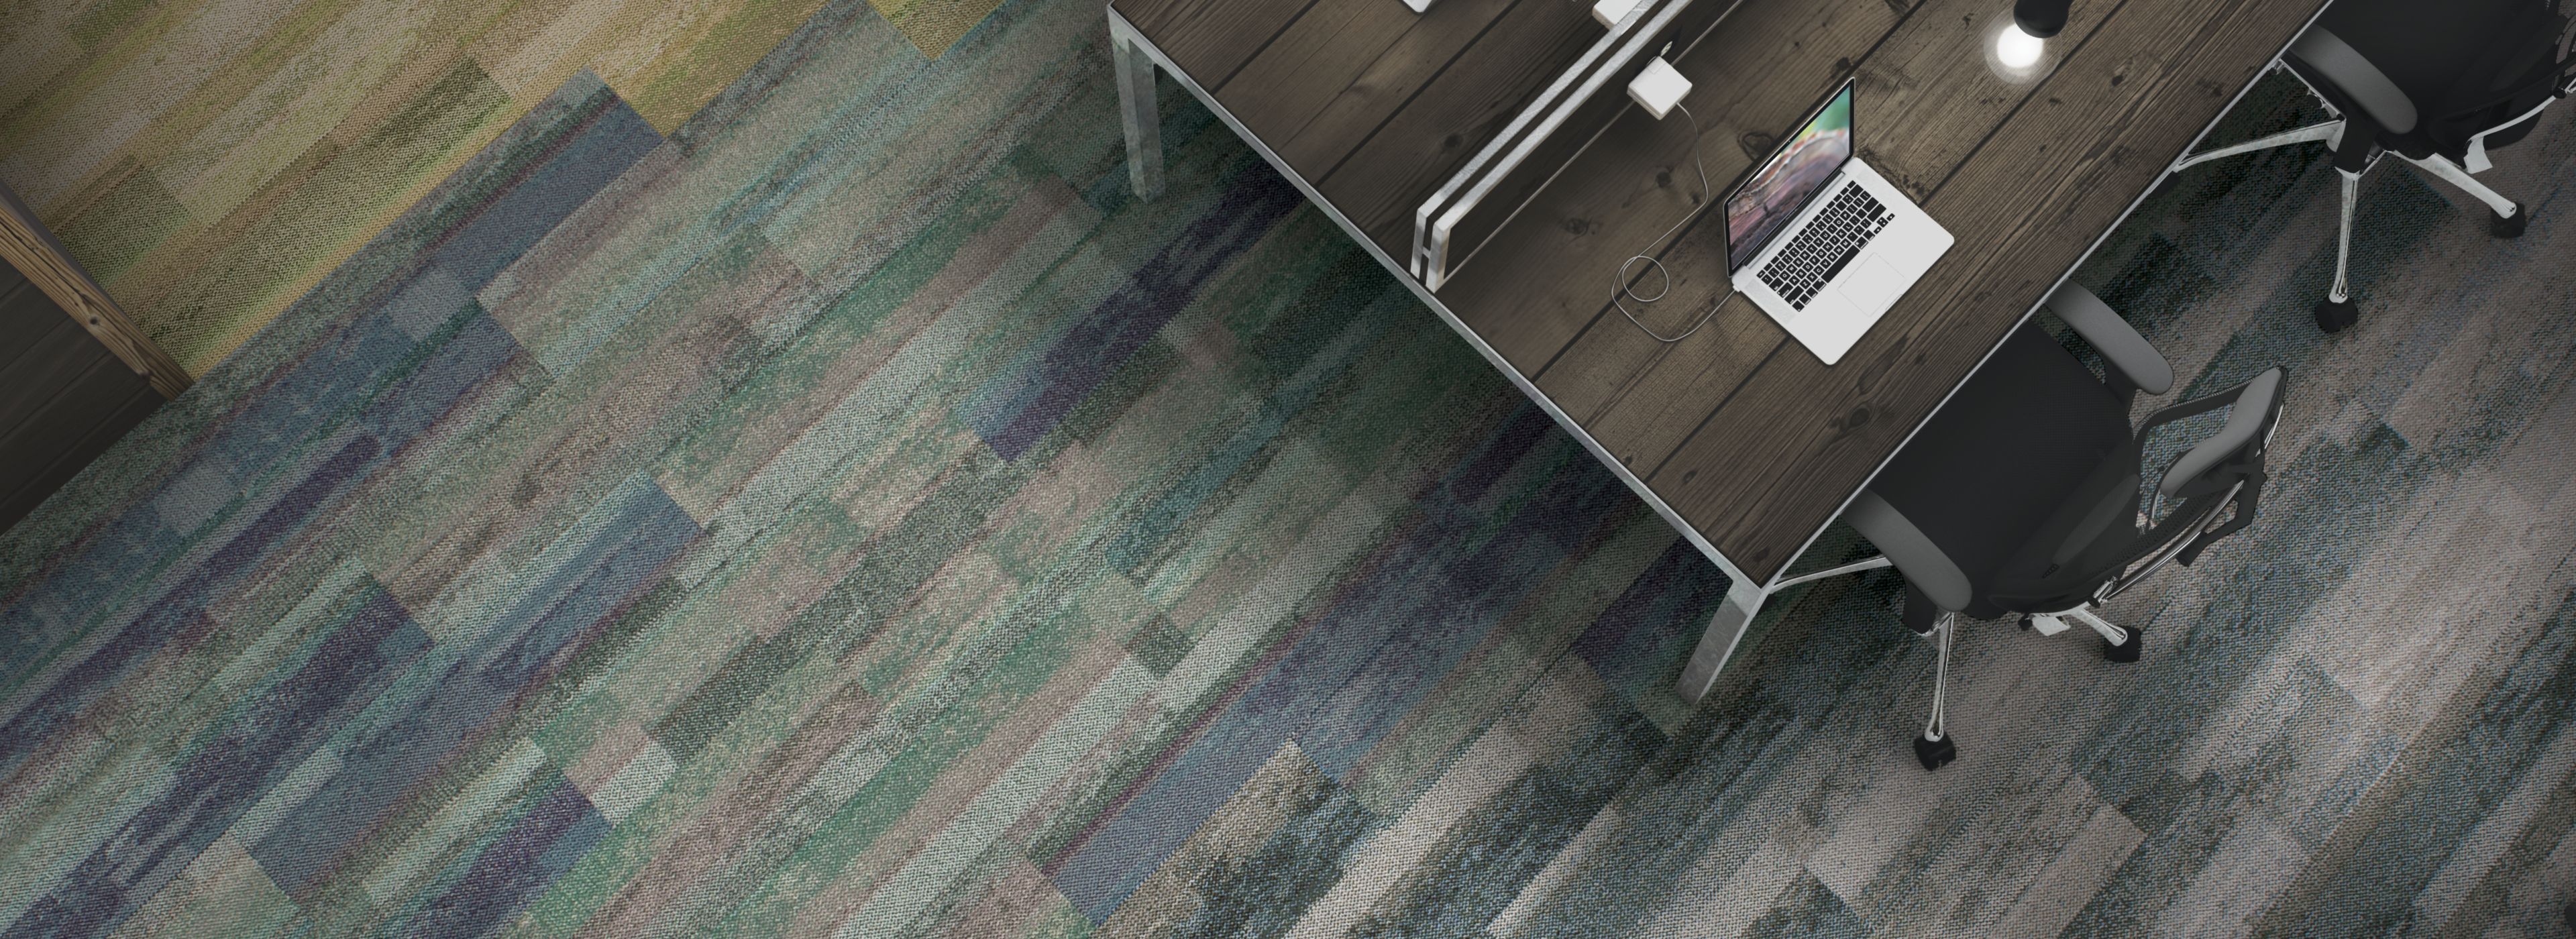 Interface Reclaim plank carpet tile in overhead view of office area imagen número 1